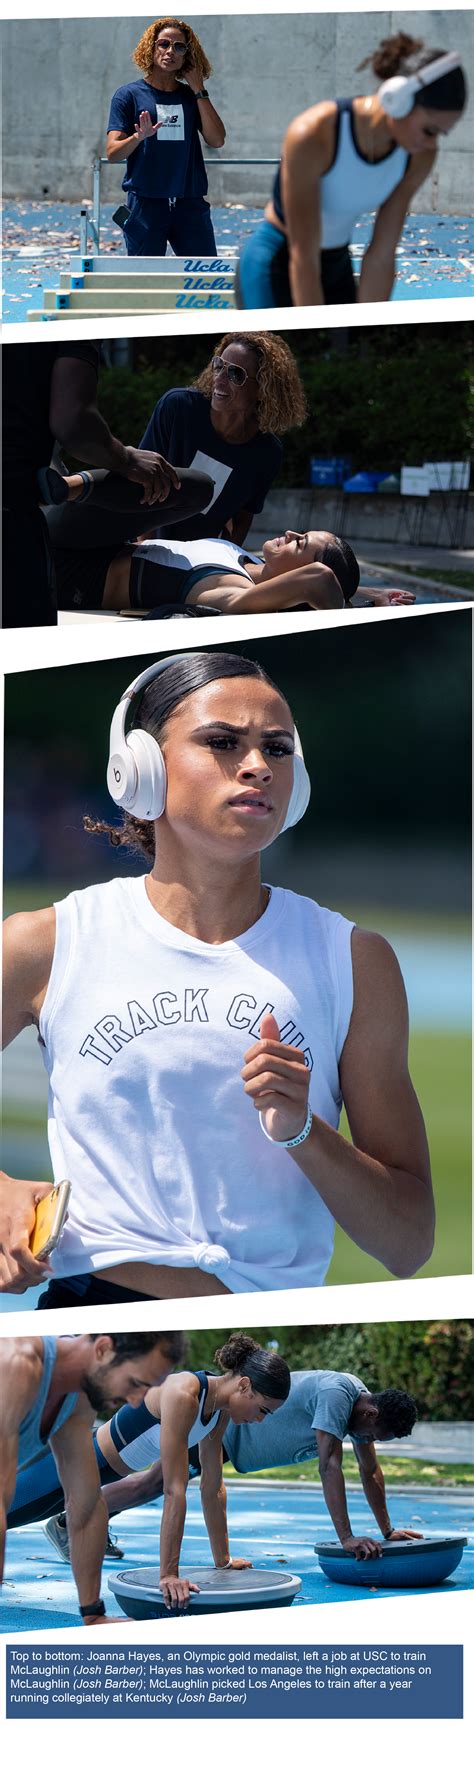 Sydney michelle mclaughlin (born august 7, 1999) is an american hurdler and sprinter who competed for the university of kentucky before turning professional. N.J. track legend Sydney McLaughlin wants more than ...